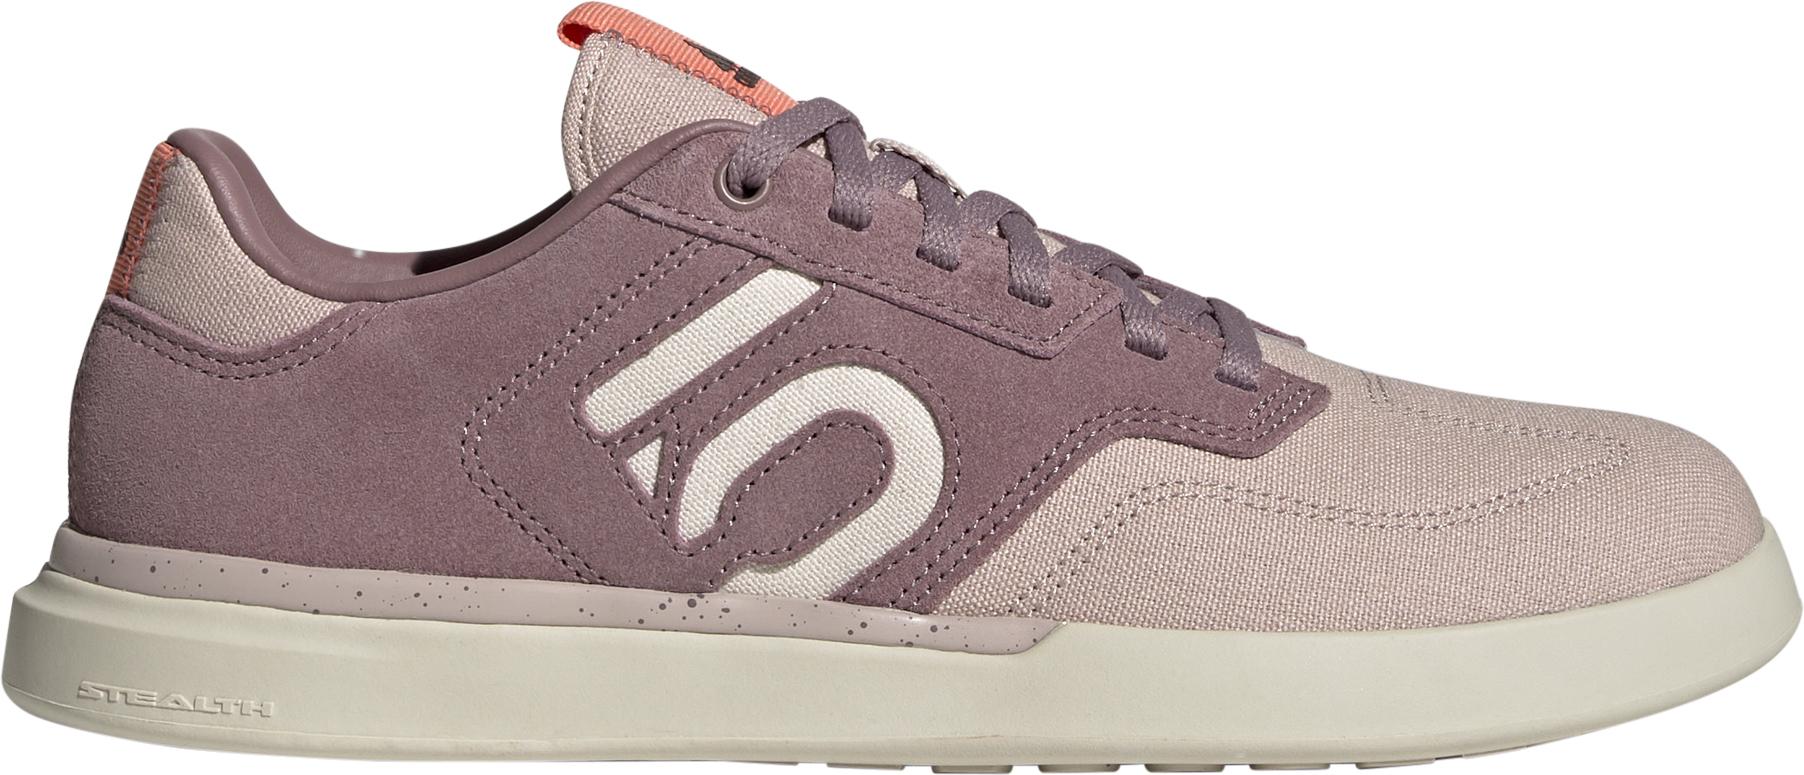 Image of Chaussures VTT Femme Five Ten Sleuth - Wonder Oxide/Wonder Taupe/Coral Fusion